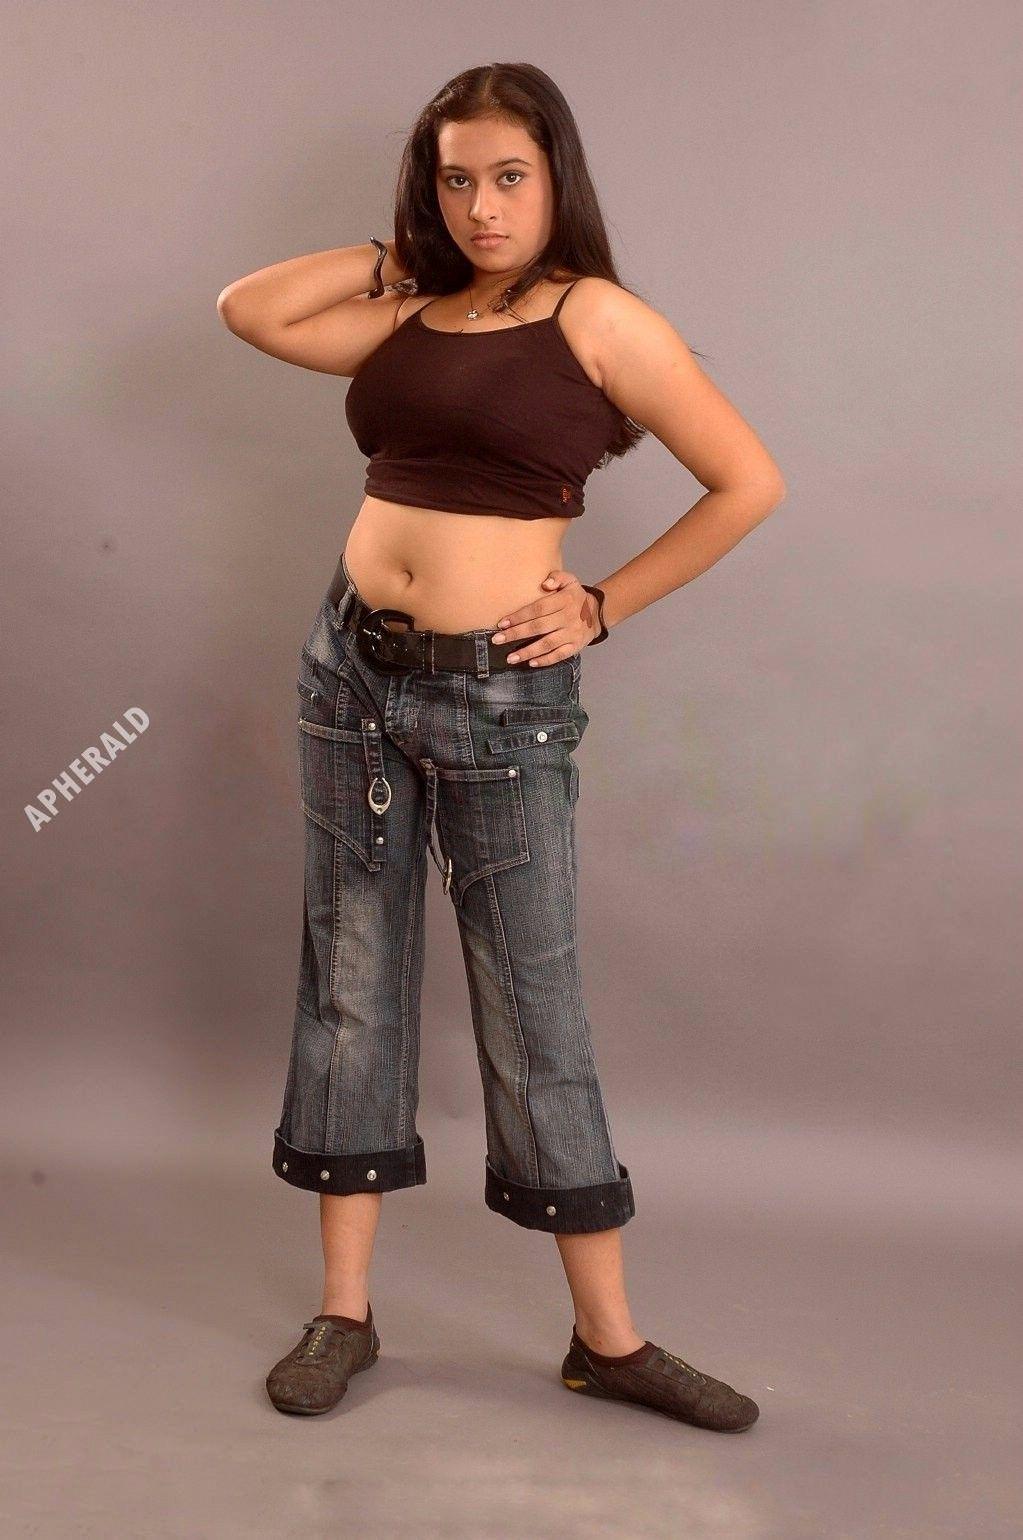 Unseen Rare Hot & Spicy Photos of Sri Divya from her Modelling days!